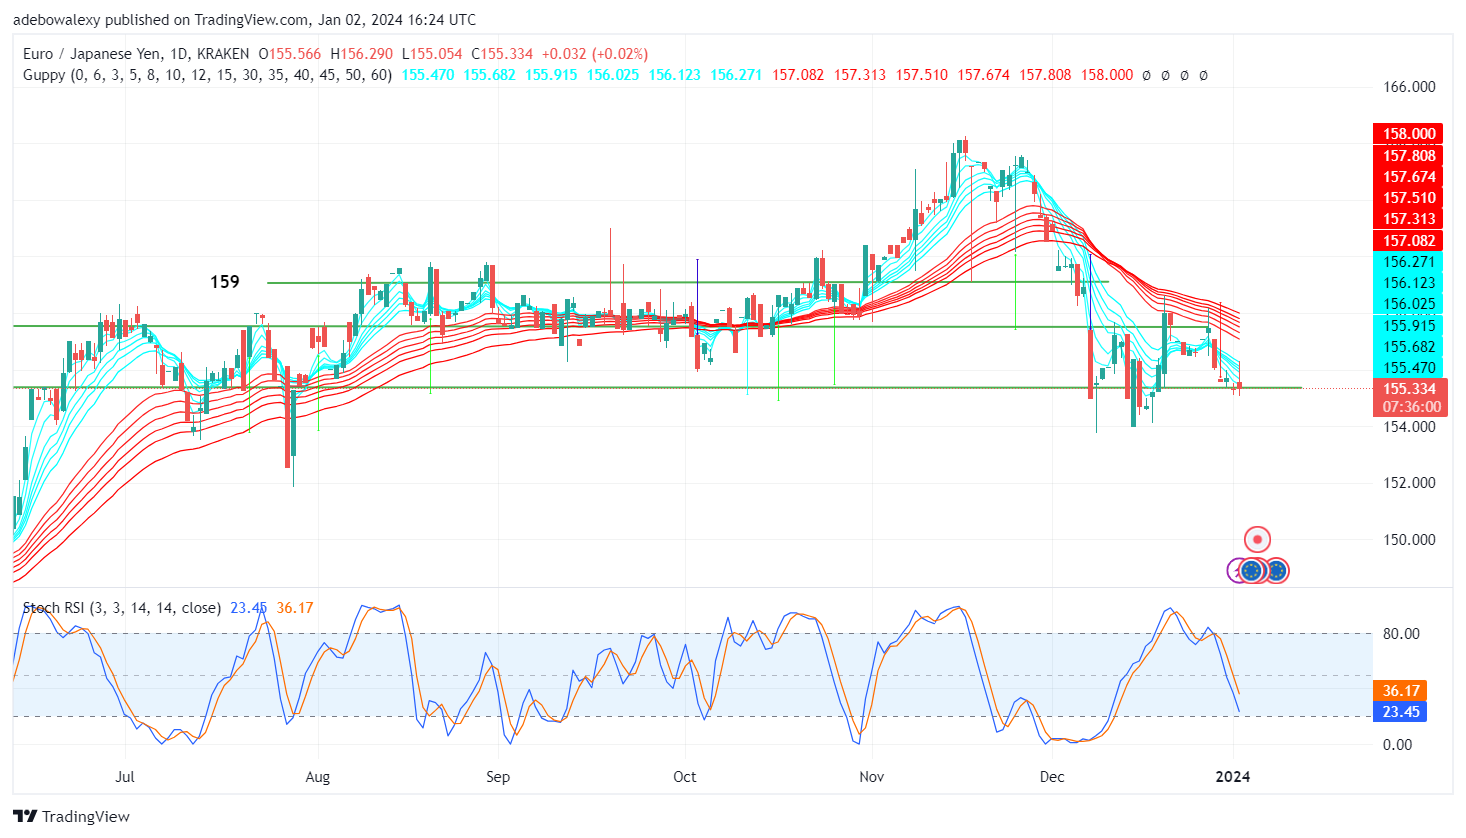 EURJPY Revisits Below the 150.50 Mark